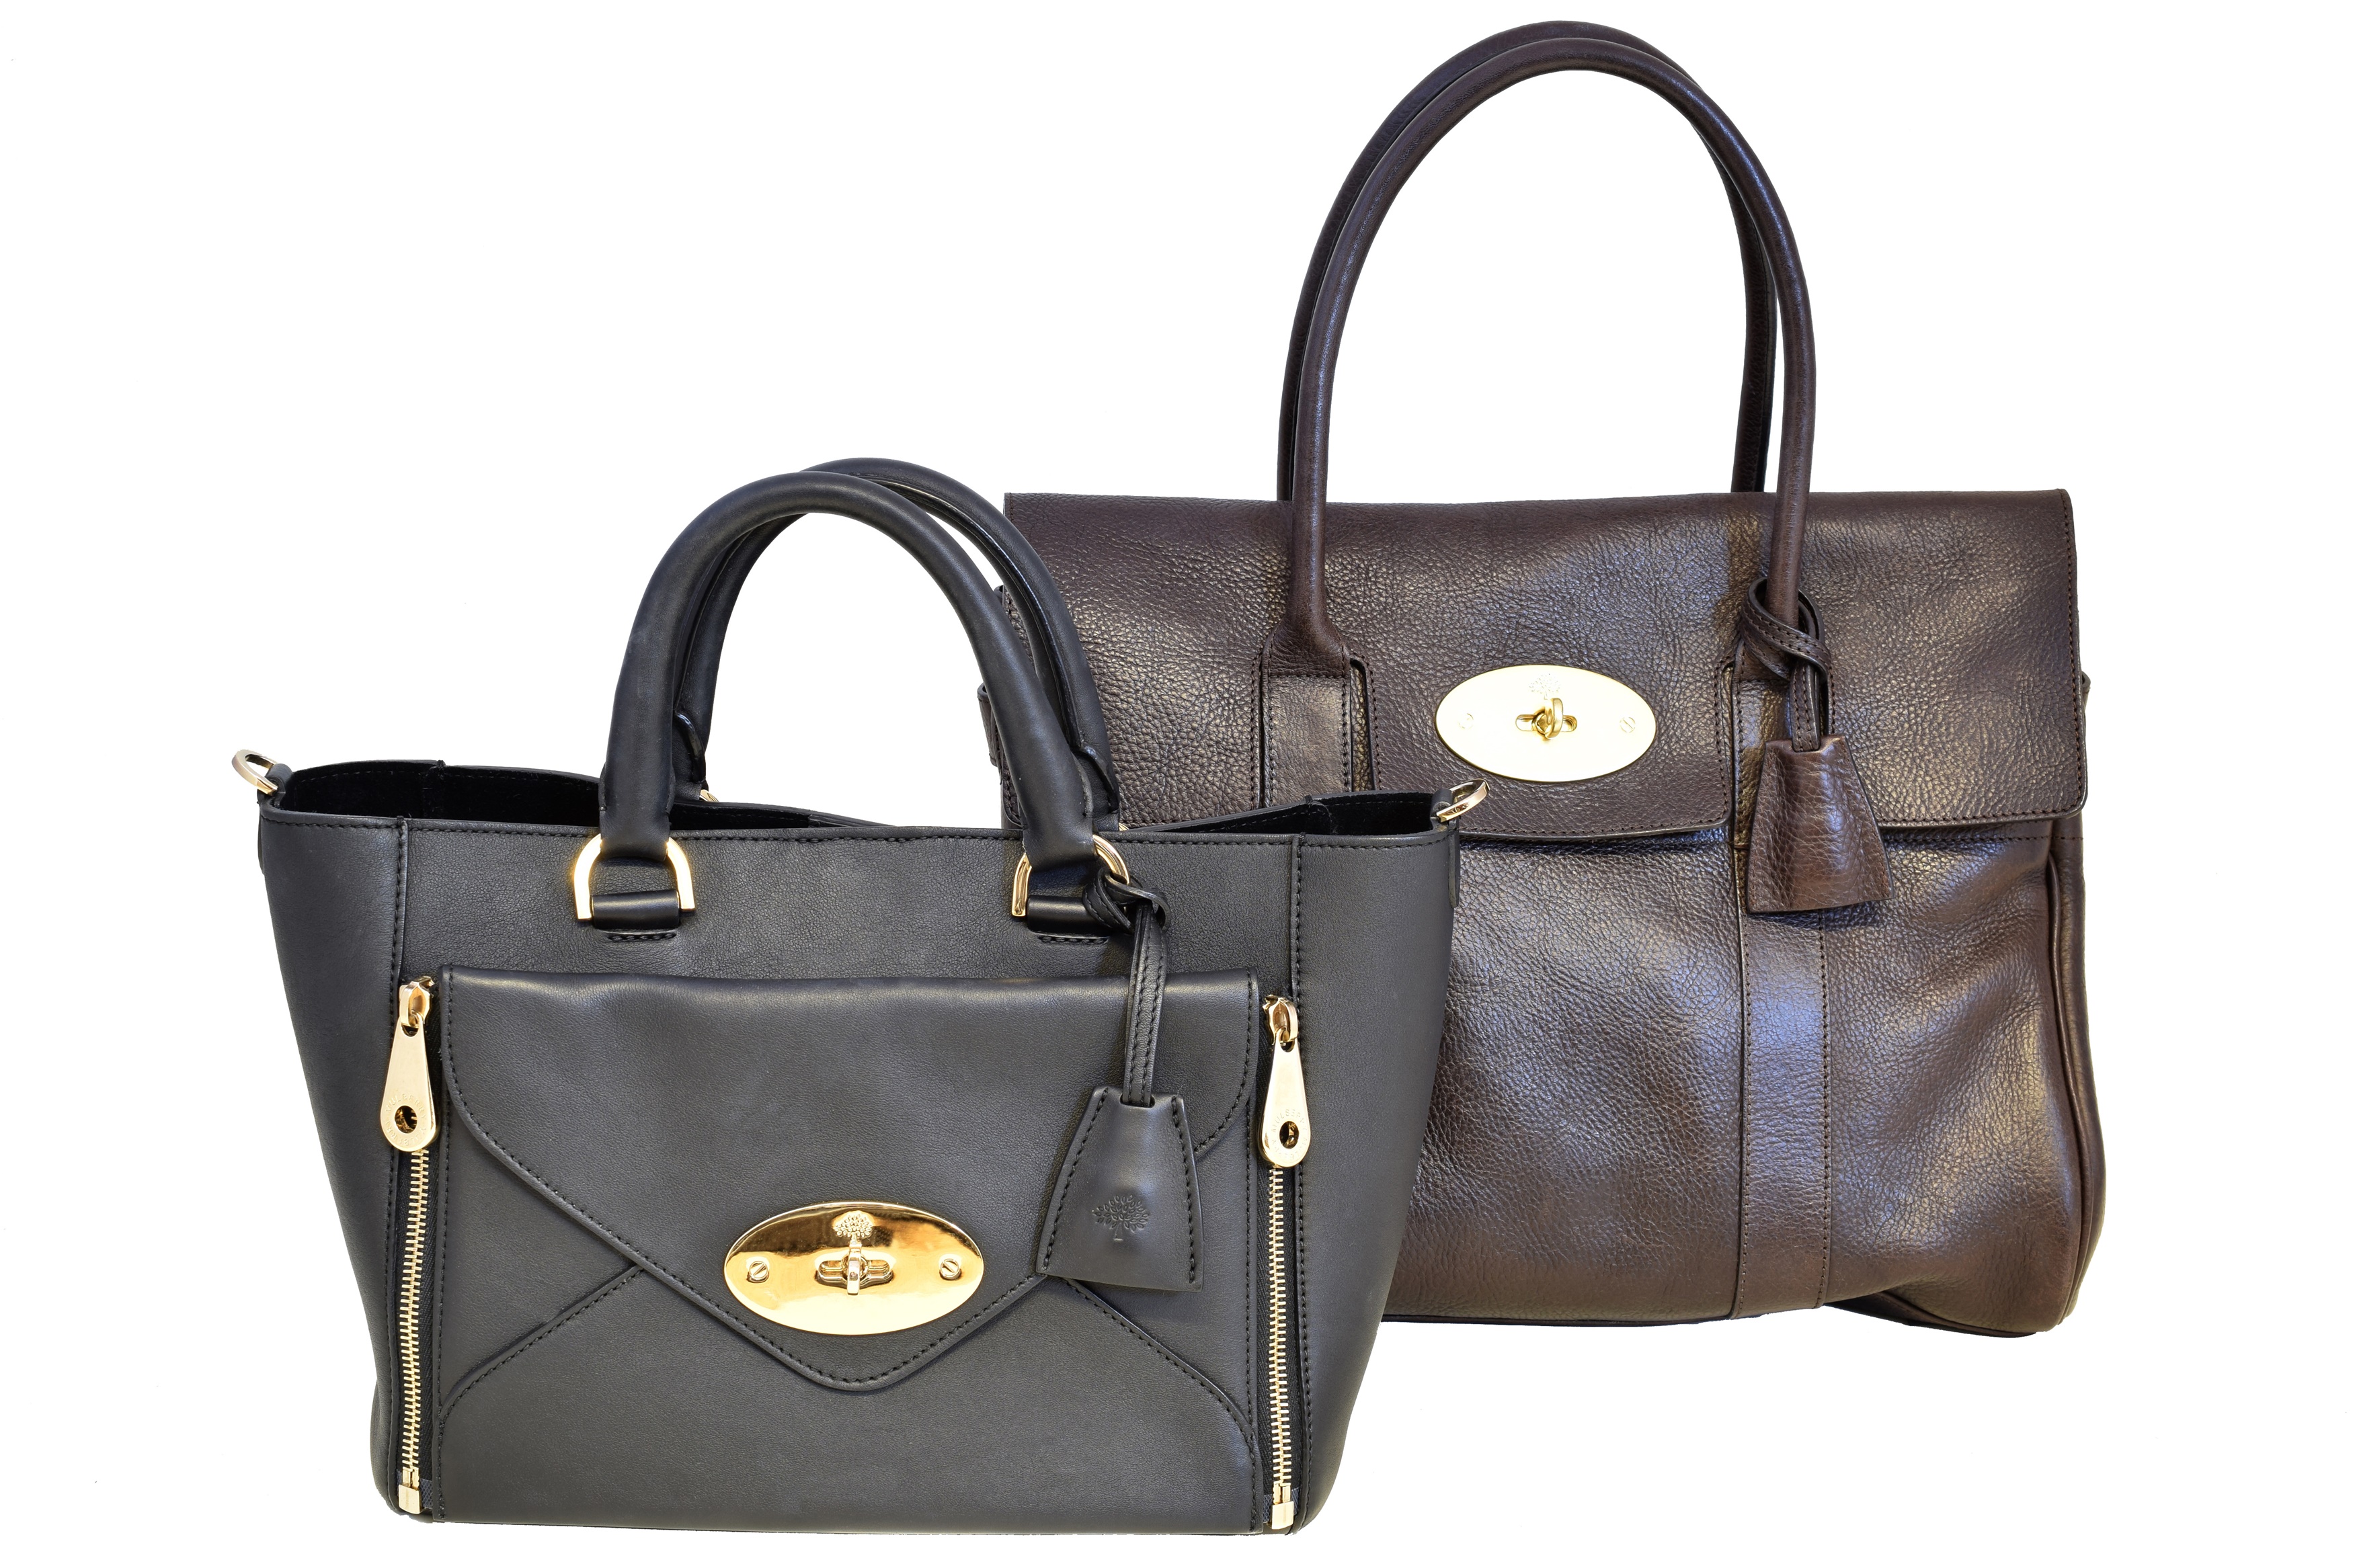 Mulberry Bayswater & Mulberry Willow Bag - Designer Handbag Auctions at Peter Wilson